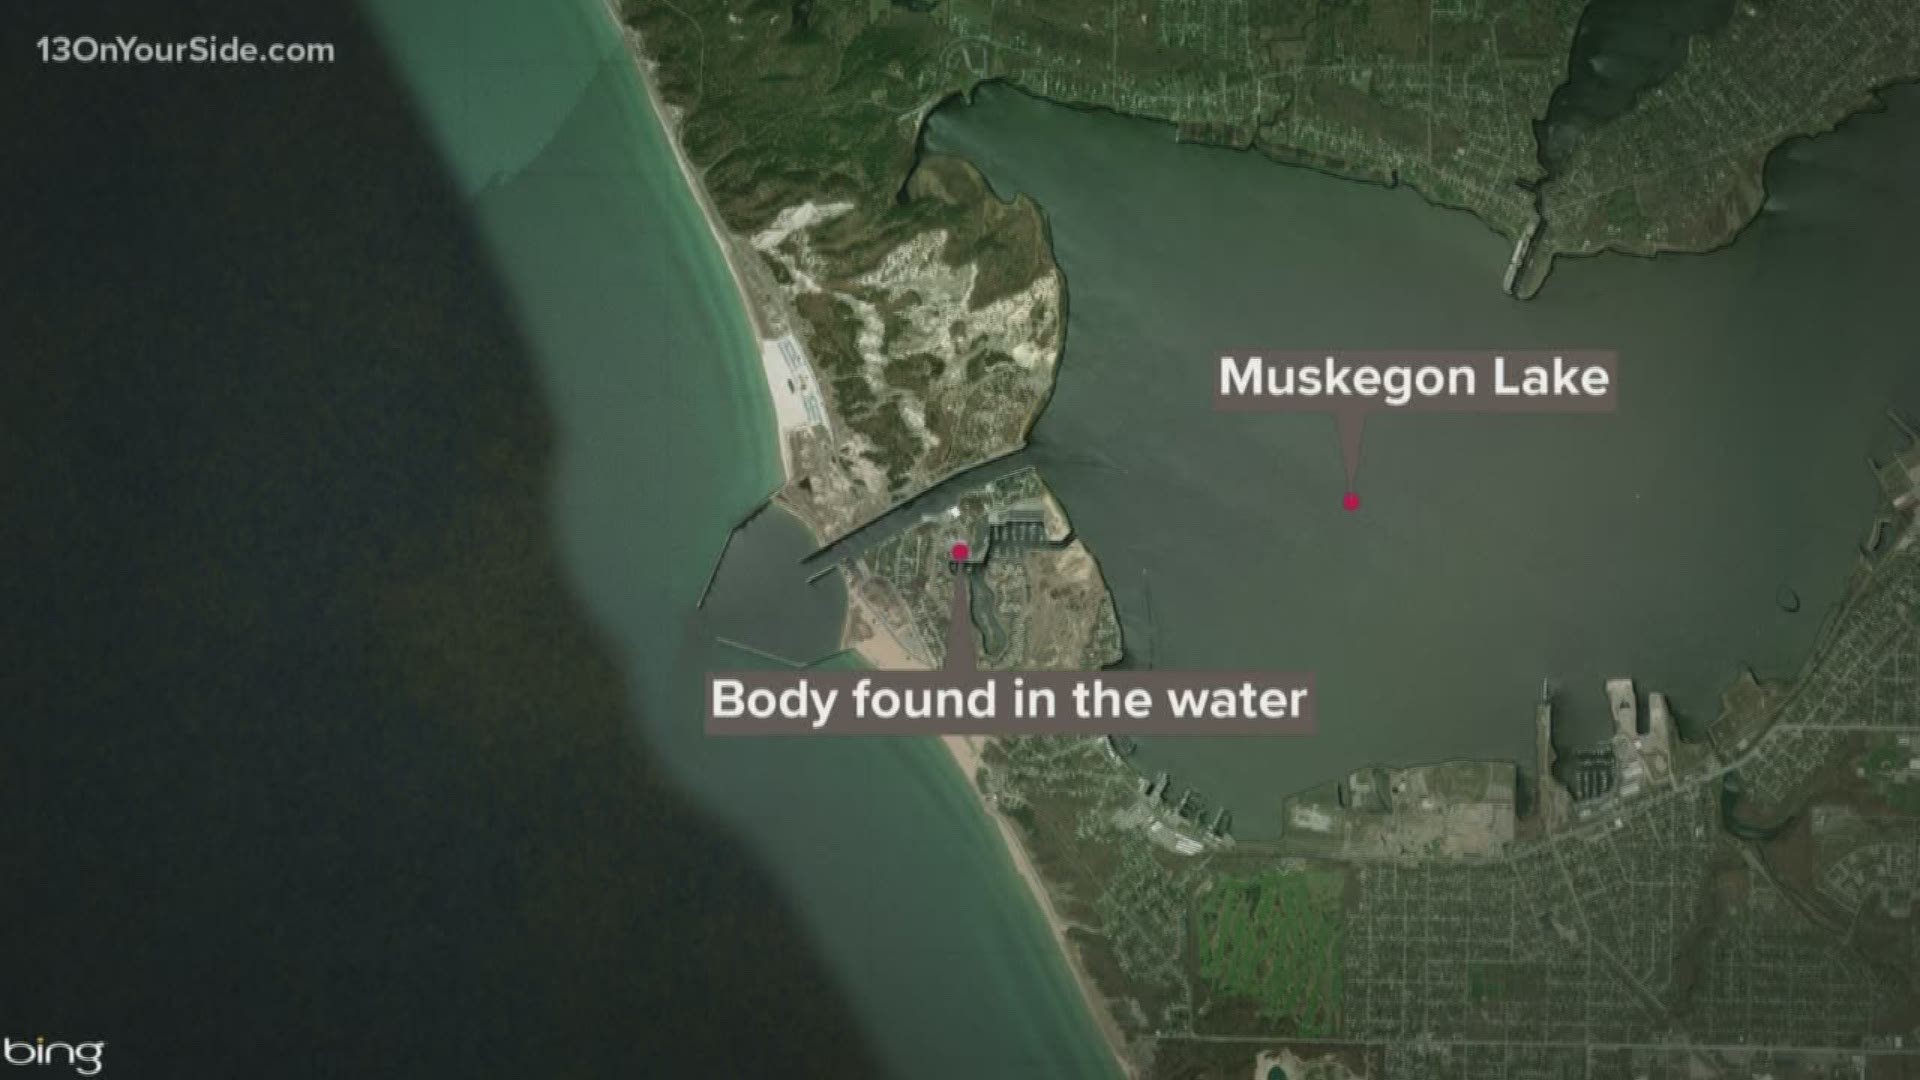 Body found in Muskegon Lake